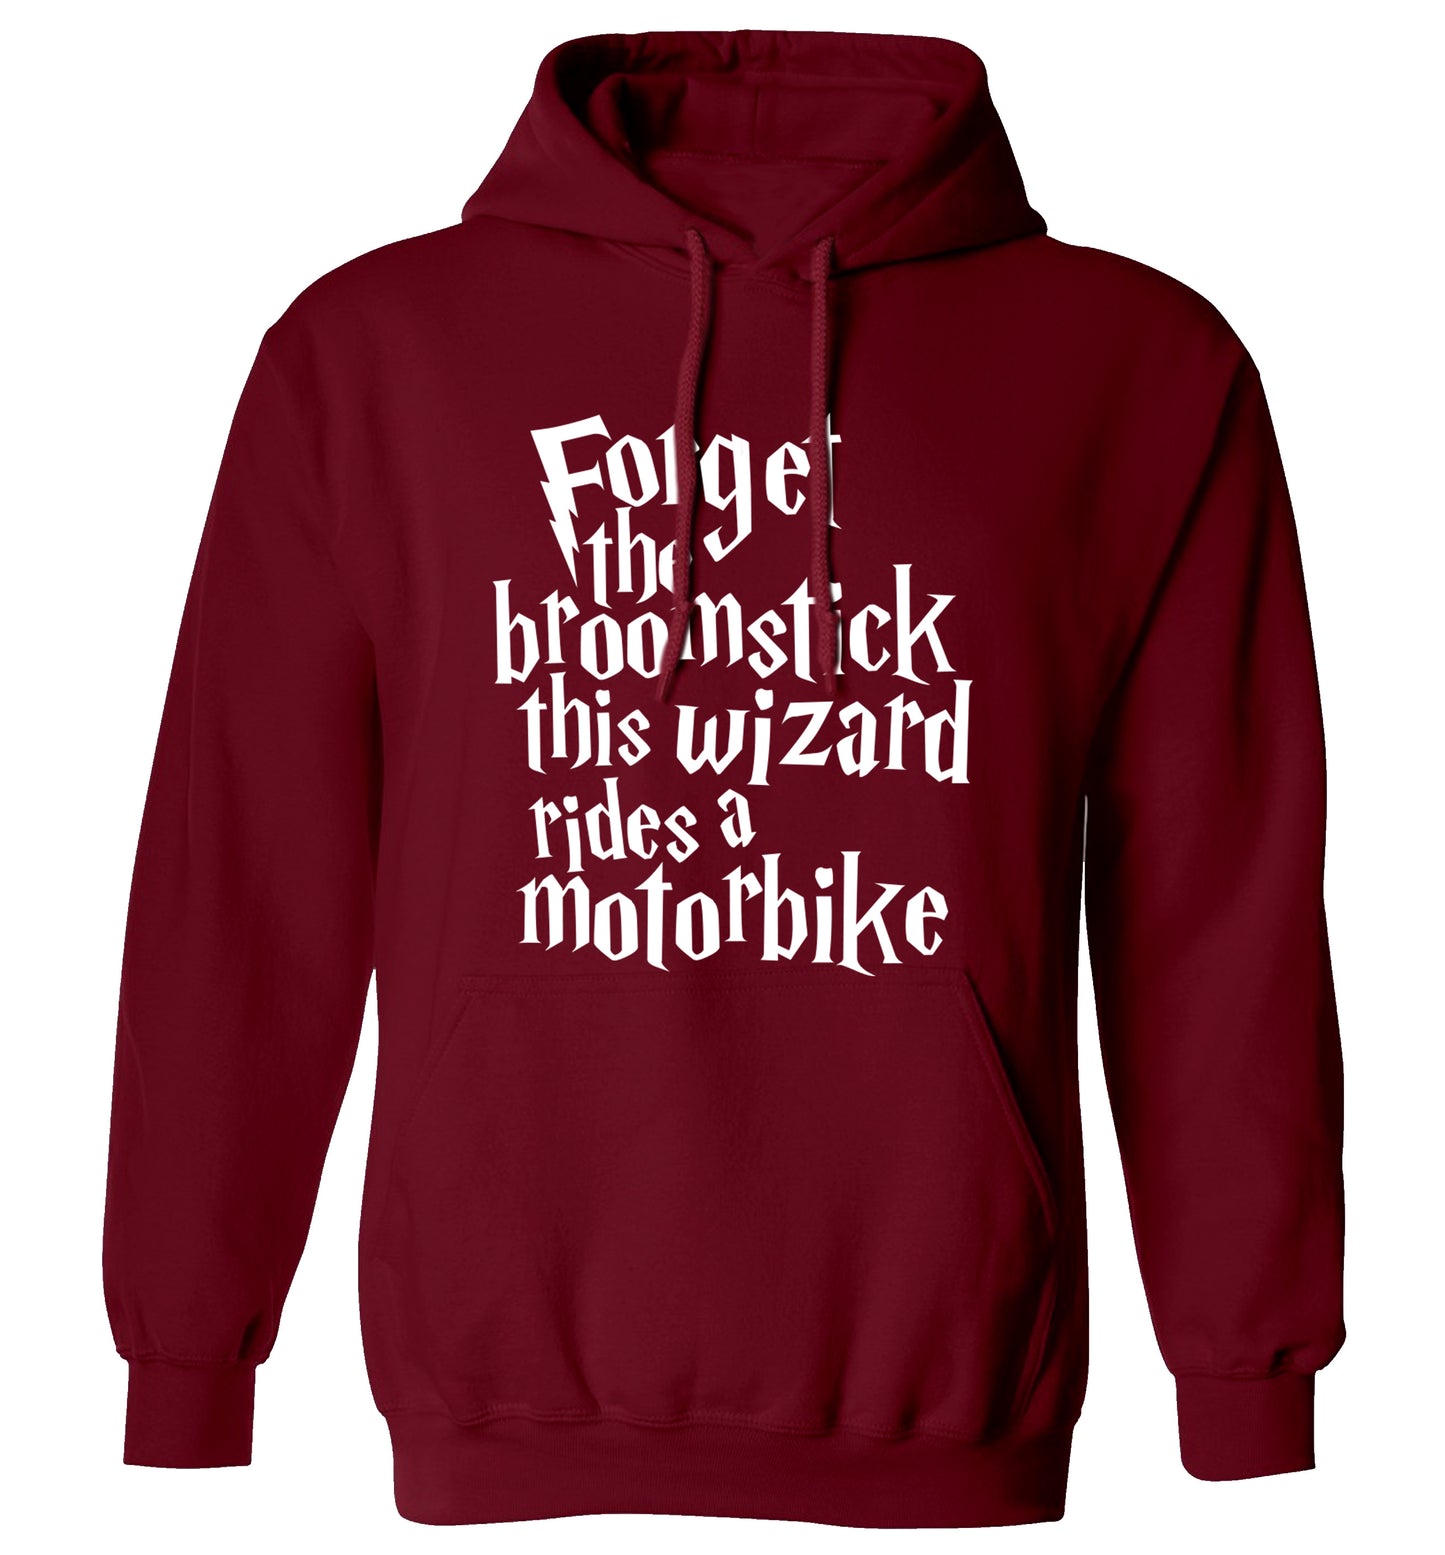 Forget the broomstick this wizard rides a motorbike adults unisexmaroon hoodie 2XL